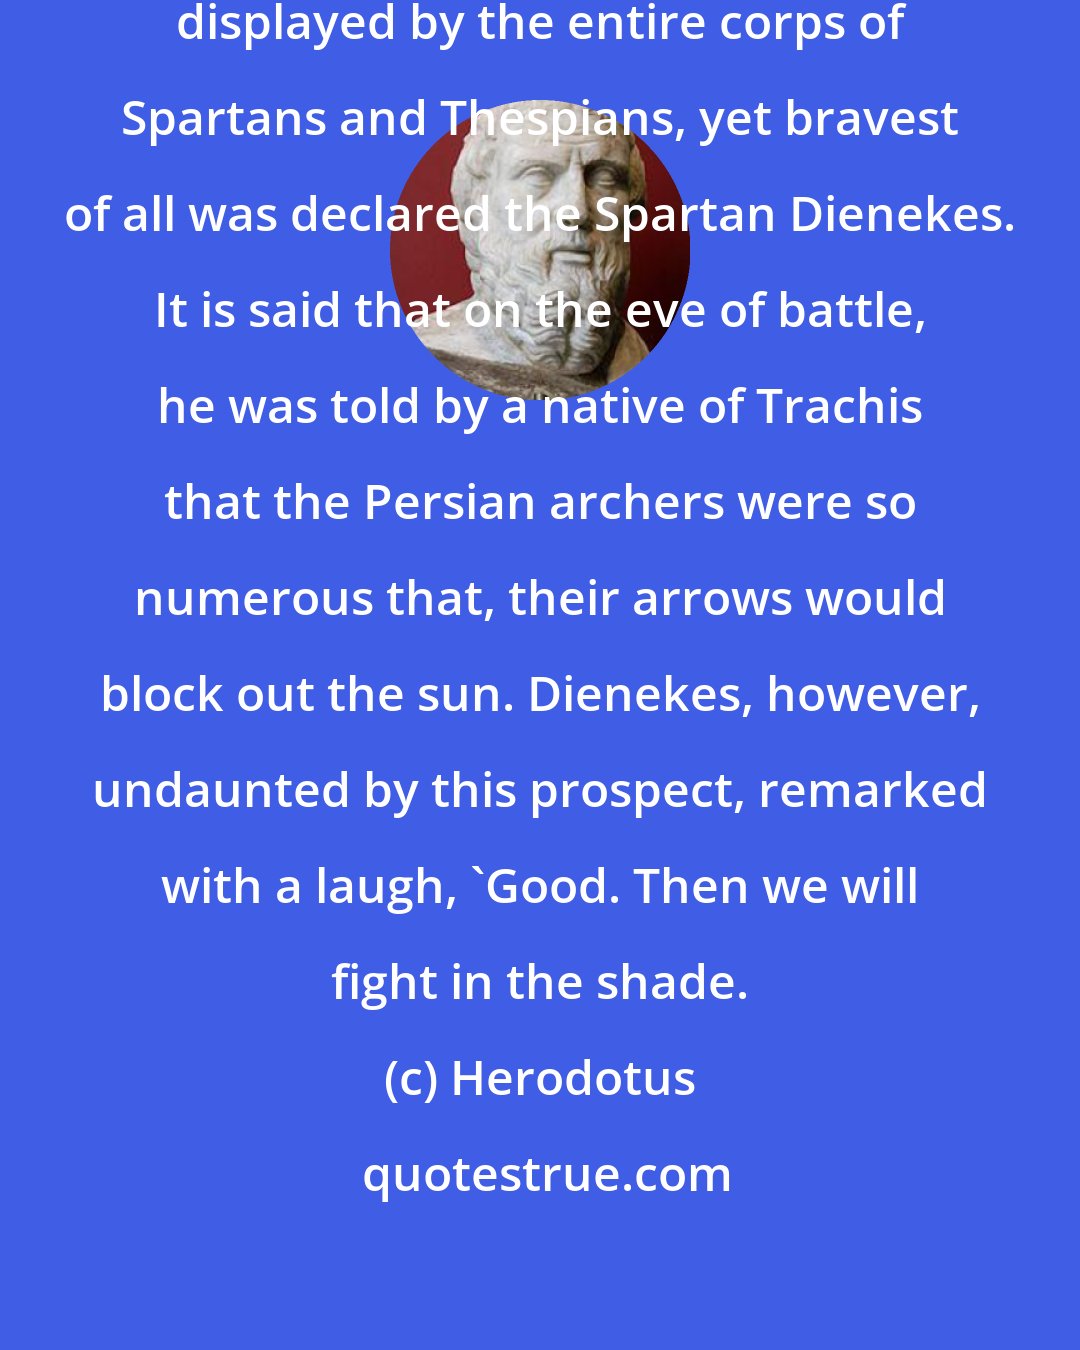 Herodotus: Although extraordinary valor was displayed by the entire corps of Spartans and Thespians, yet bravest of all was declared the Spartan Dienekes. It is said that on the eve of battle, he was told by a native of Trachis that the Persian archers were so numerous that, their arrows would block out the sun. Dienekes, however, undaunted by this prospect, remarked with a laugh, 'Good. Then we will fight in the shade.